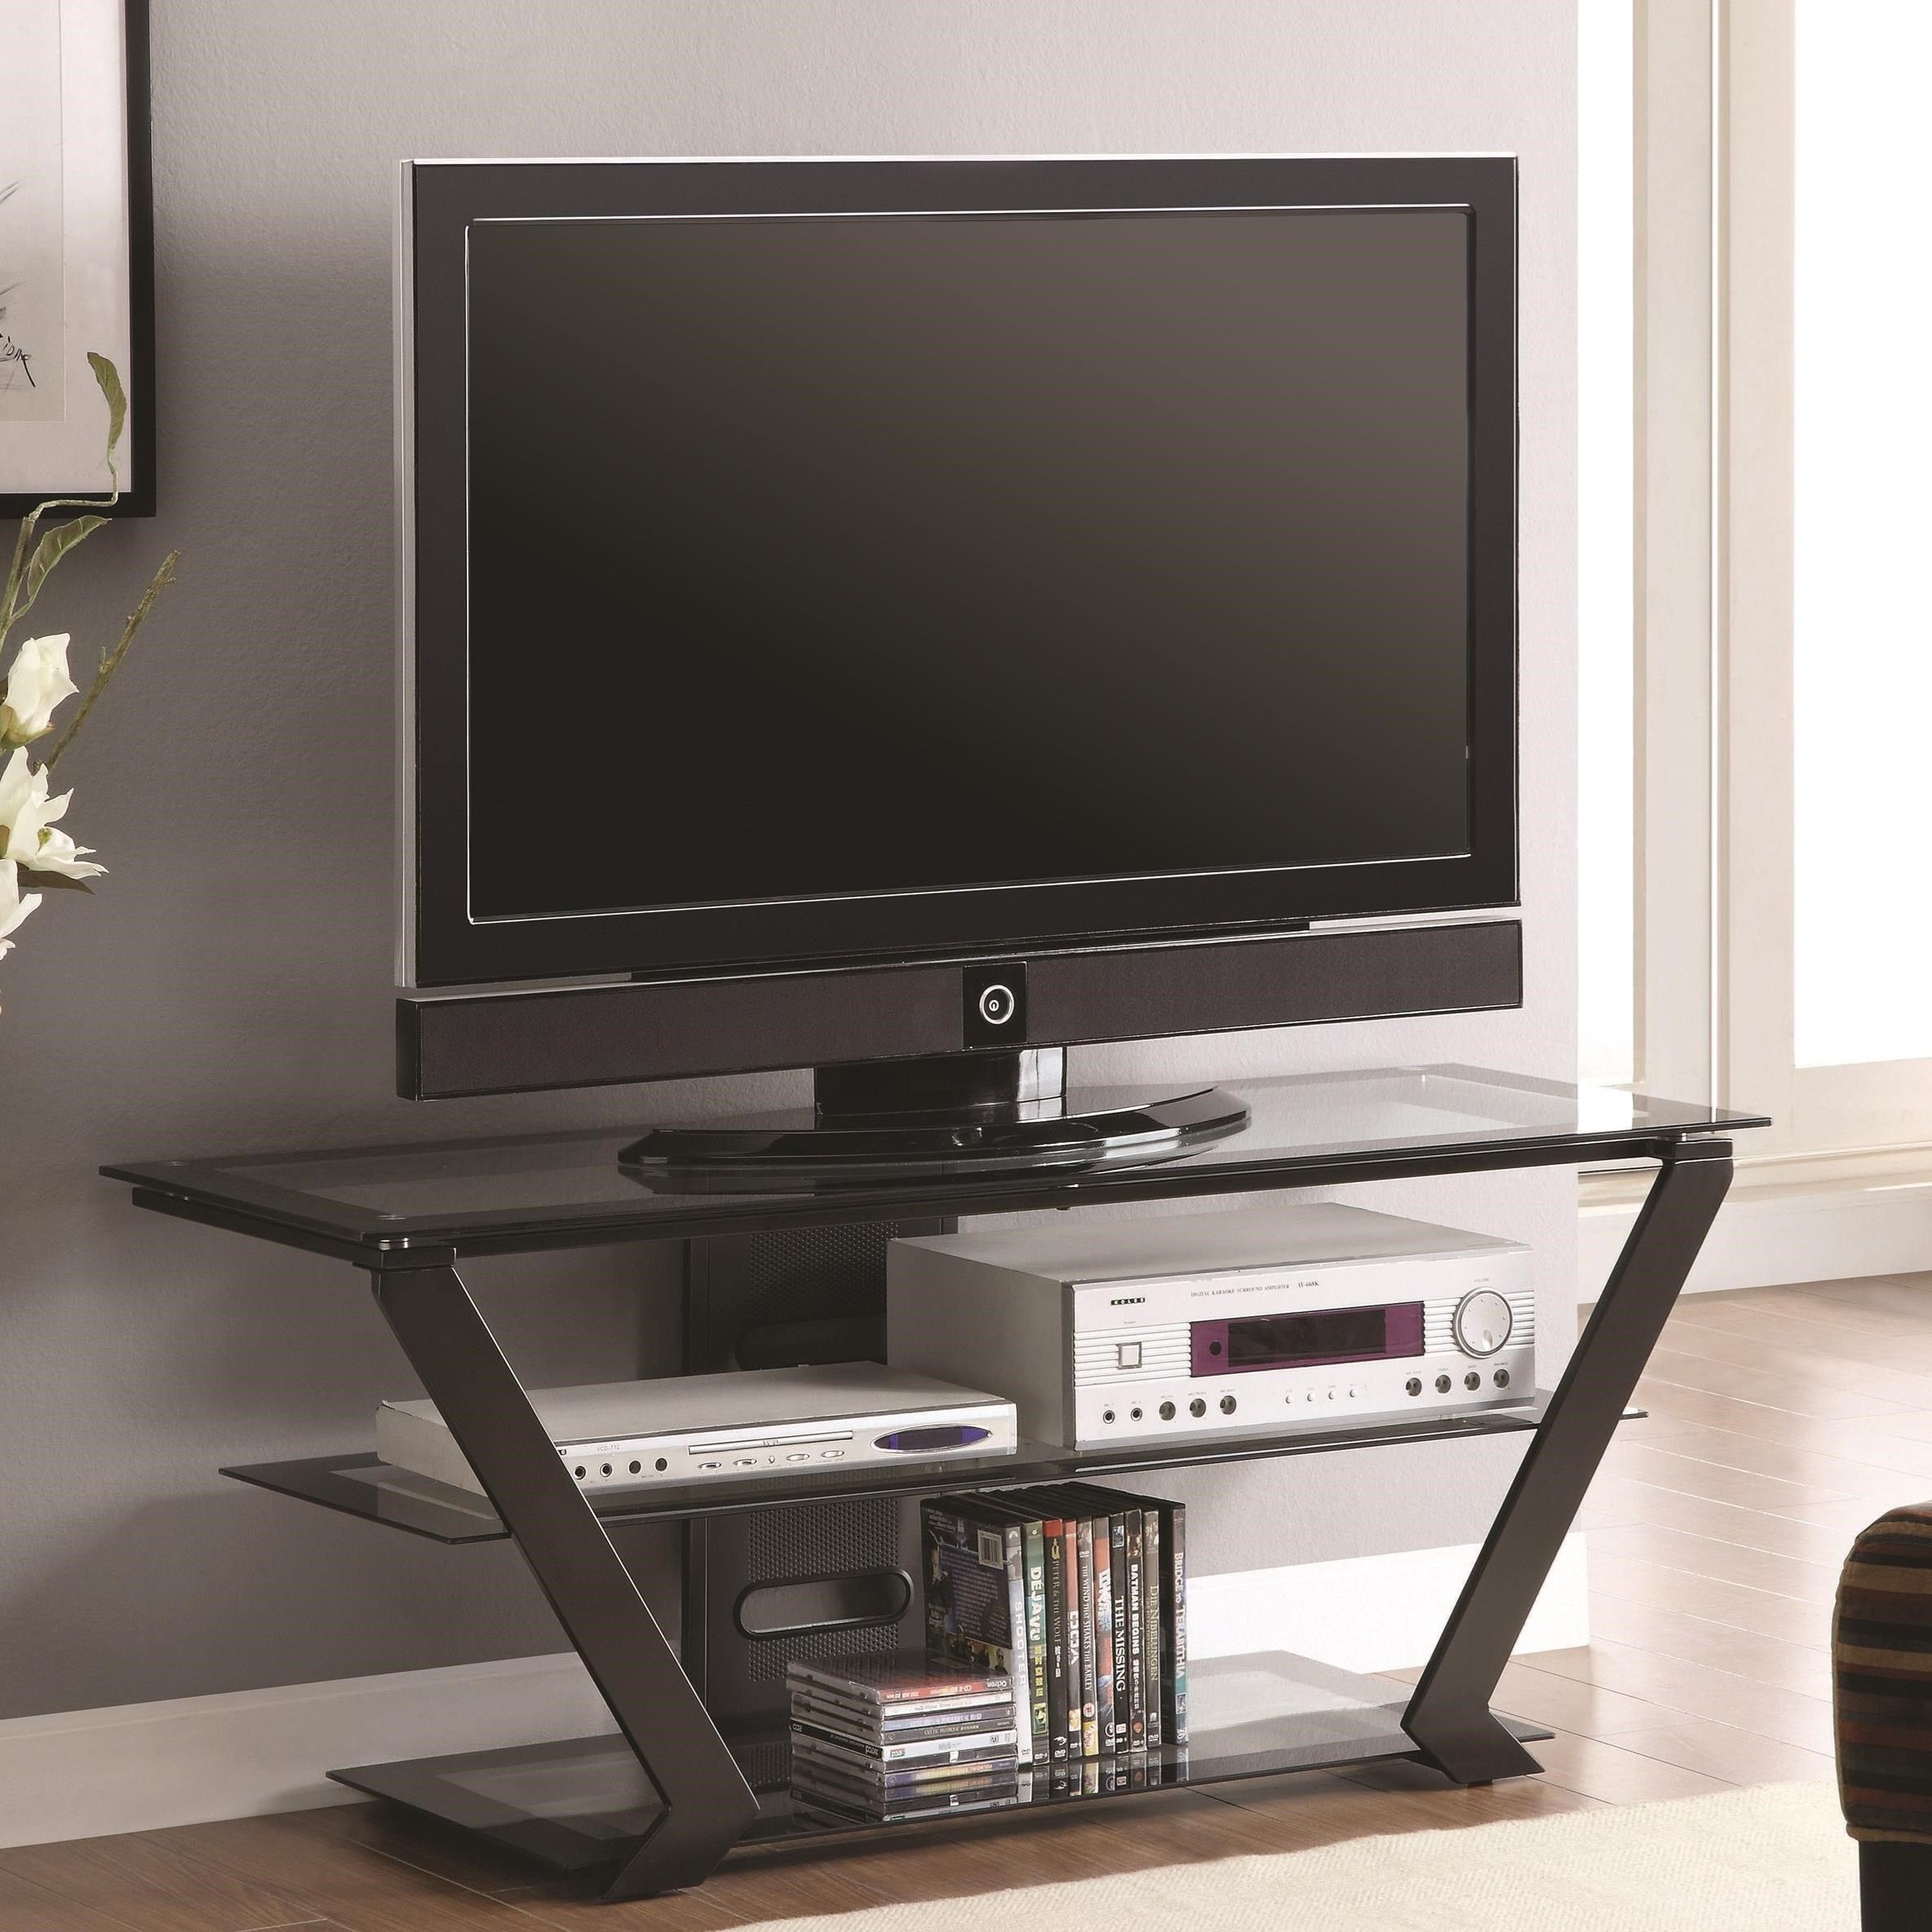 Coaster Tv Stands 701370 Contemporary Tv Stand | Arwood's Furniture Intended For Oaklee Tv Stands (Gallery 13 of 20)